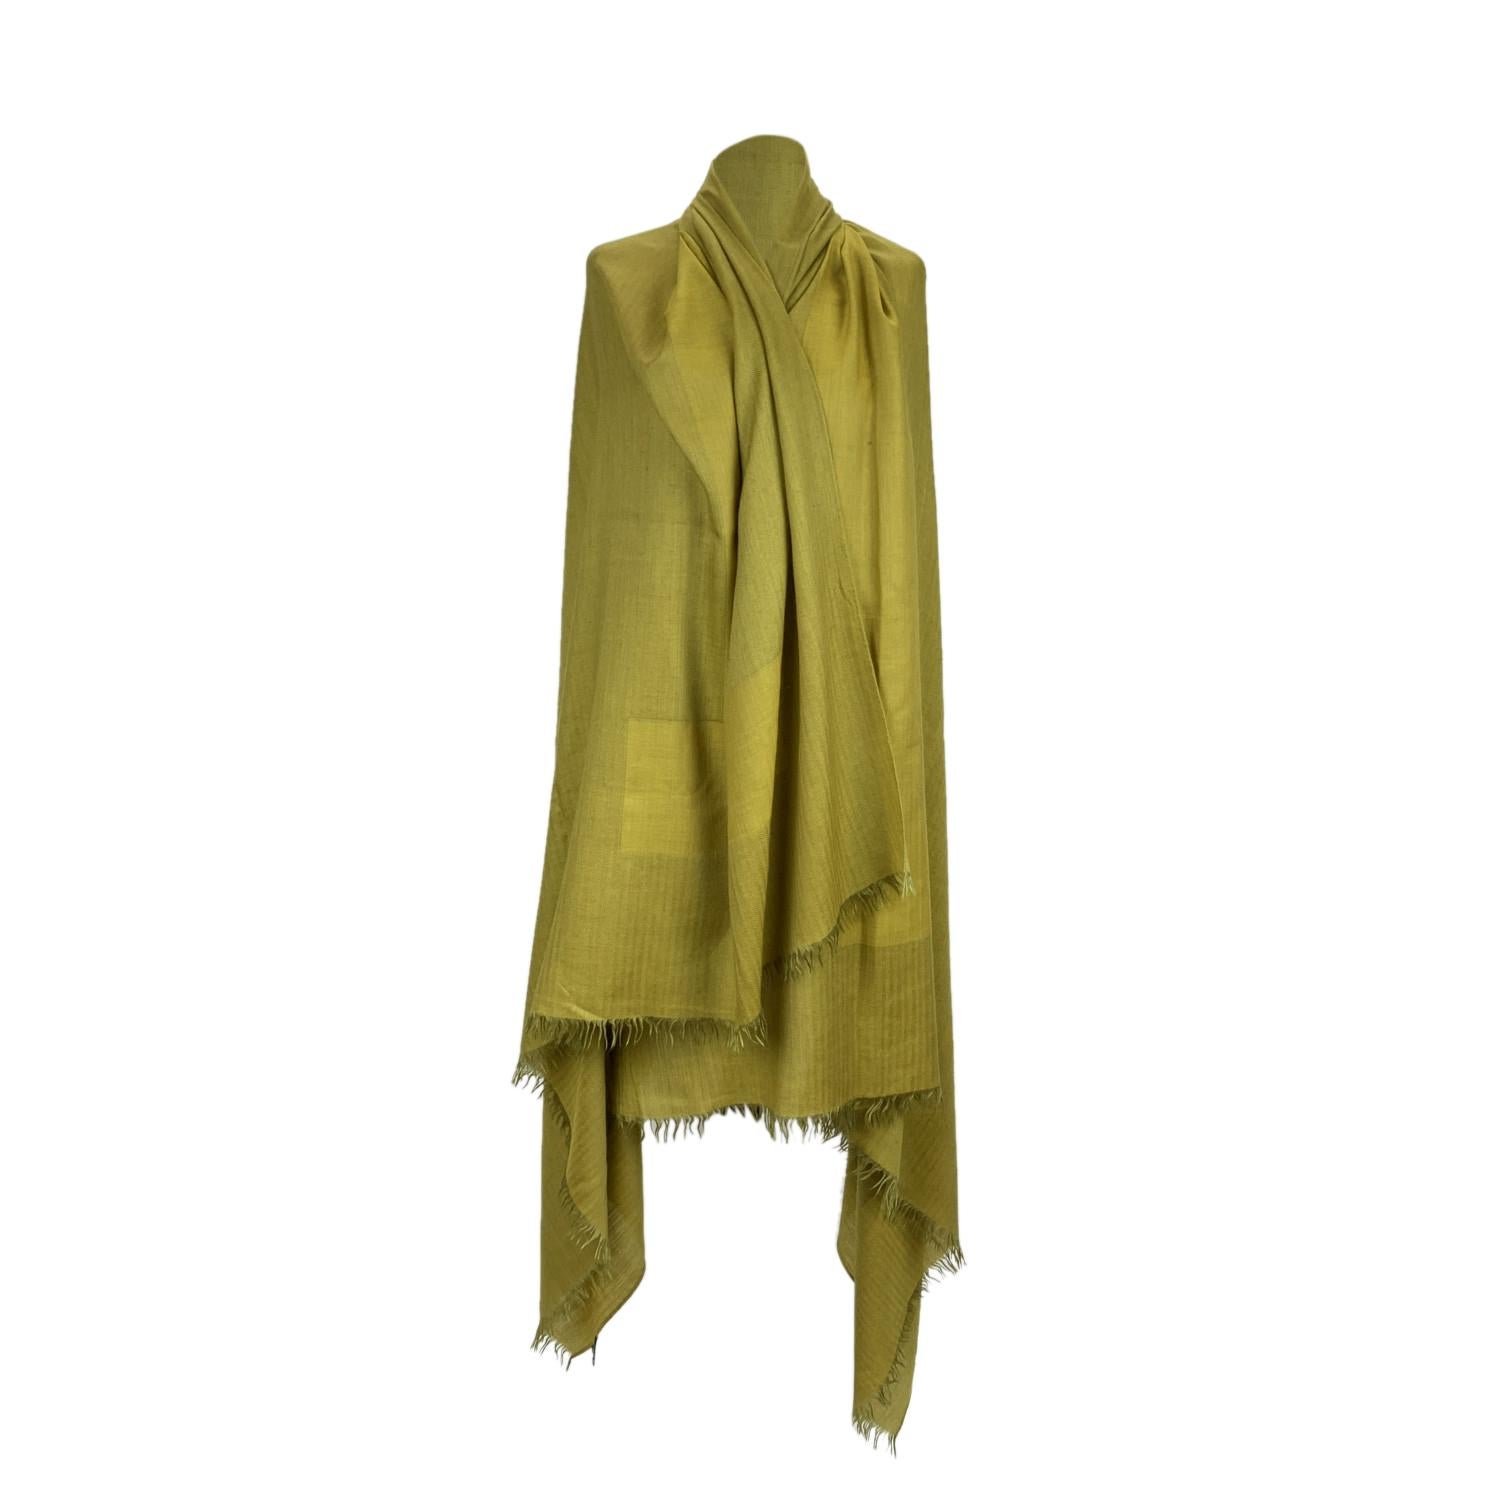 Rare cashmere, wool and silk scarf by Hermes. Green yellow color. Big H pattern in the center. Composition; 77% Cashmere, 14% New Wool, 9% Silk. Fringed hem. Approx. measurements: 60 x 80 inches - 152 x 203. Made in Italy. 'HERMES - Paris' and